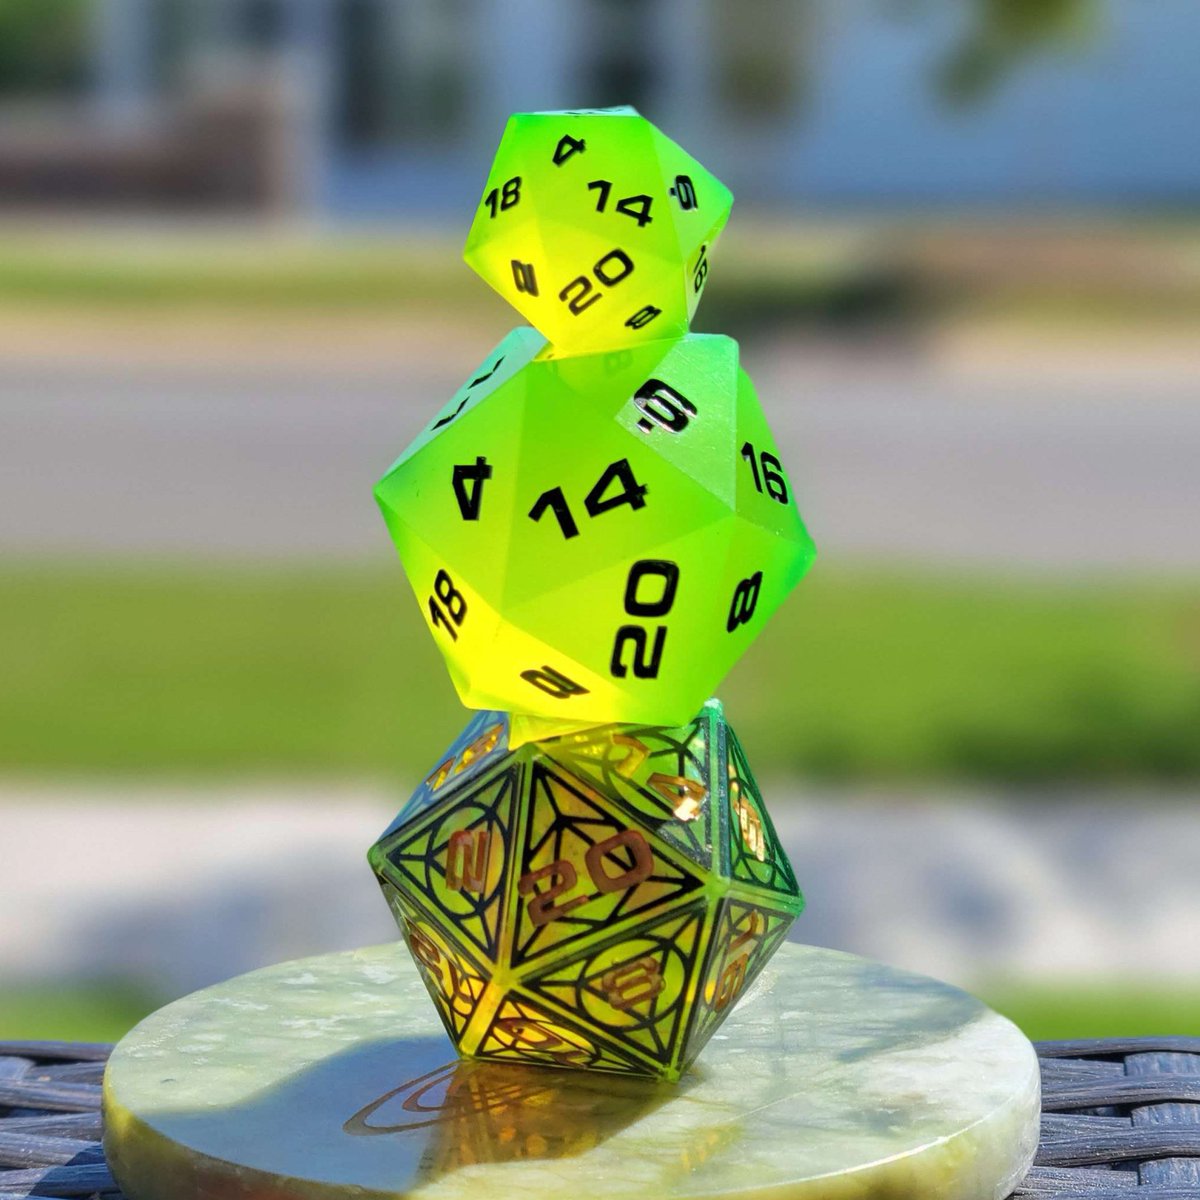 Chartreuse! 🧪🎲 Forged with an alchemist's potion, these dice are charged with a magical aura 💛💚

#dicelover #handmadedice #sharpedgedice #resindice #5e #polyhedraldice #ttrpg #pathfinder #dnd  #chartreuse #dfff00 #shadowrun #dicegoblin